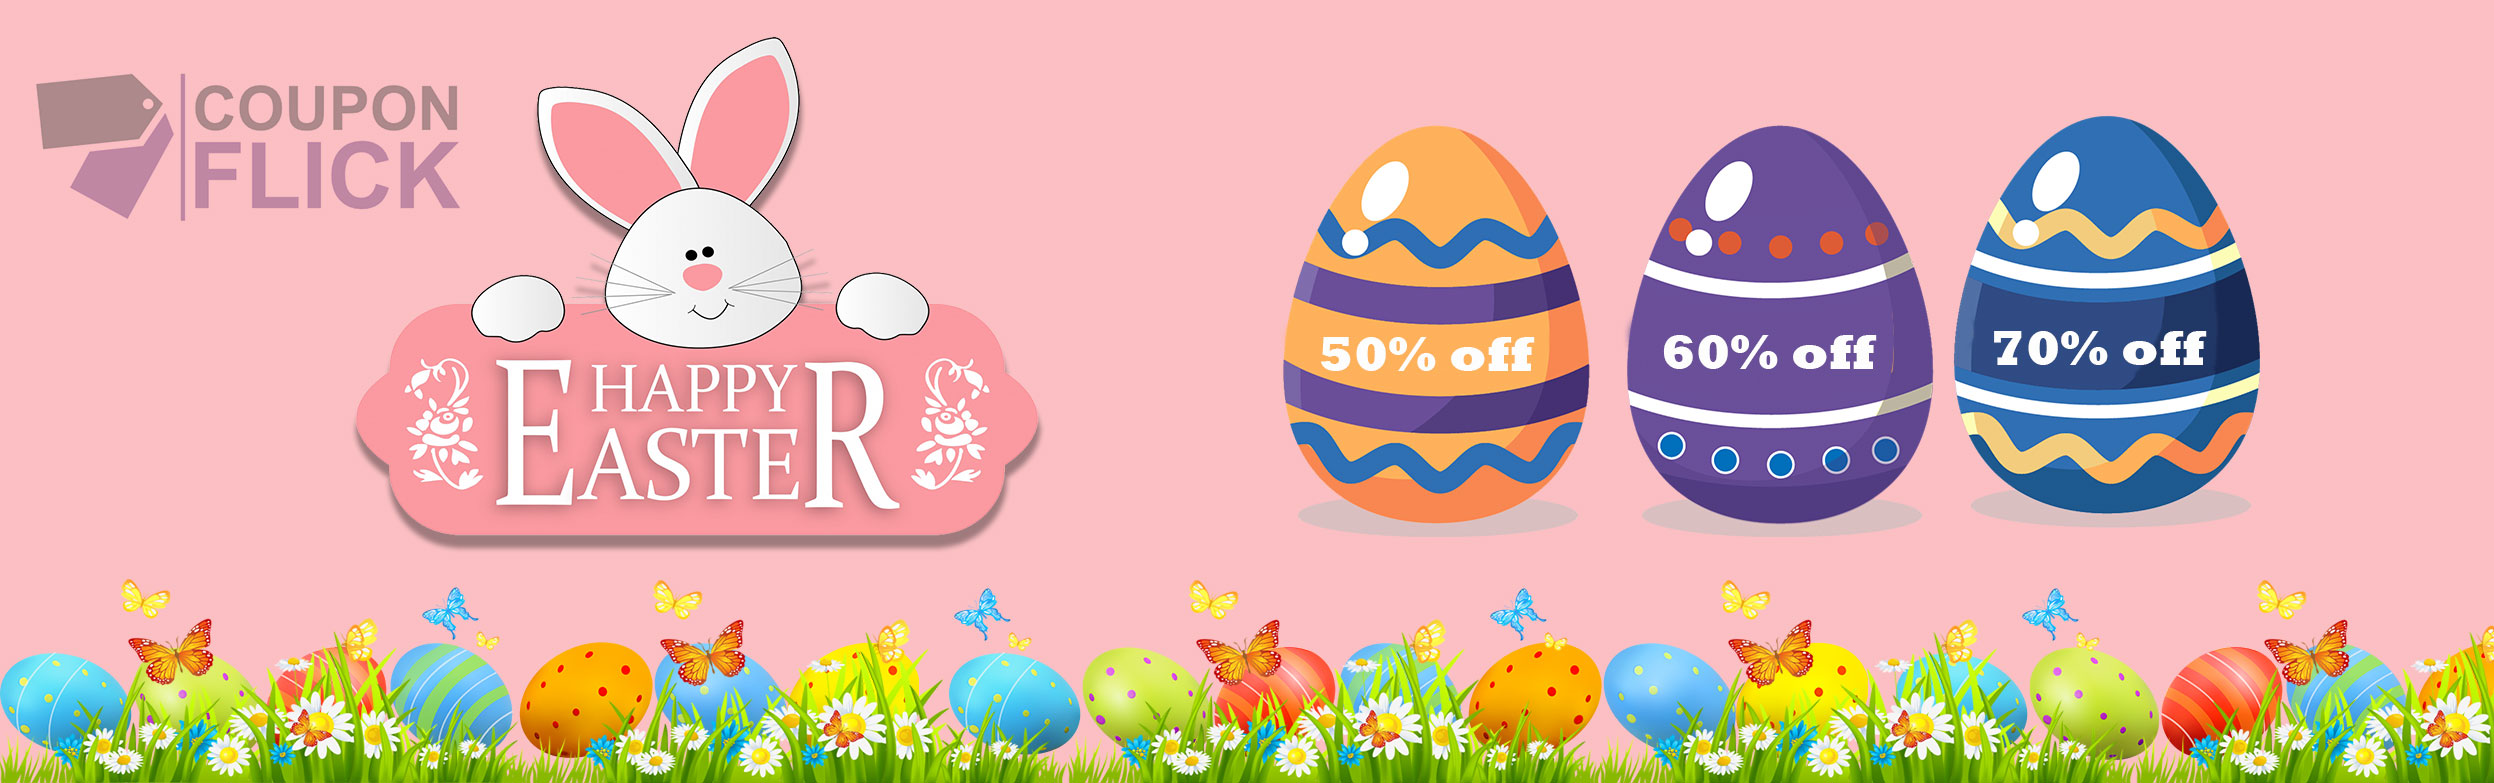 Up To 70% OFF Easter Offers & Coupons